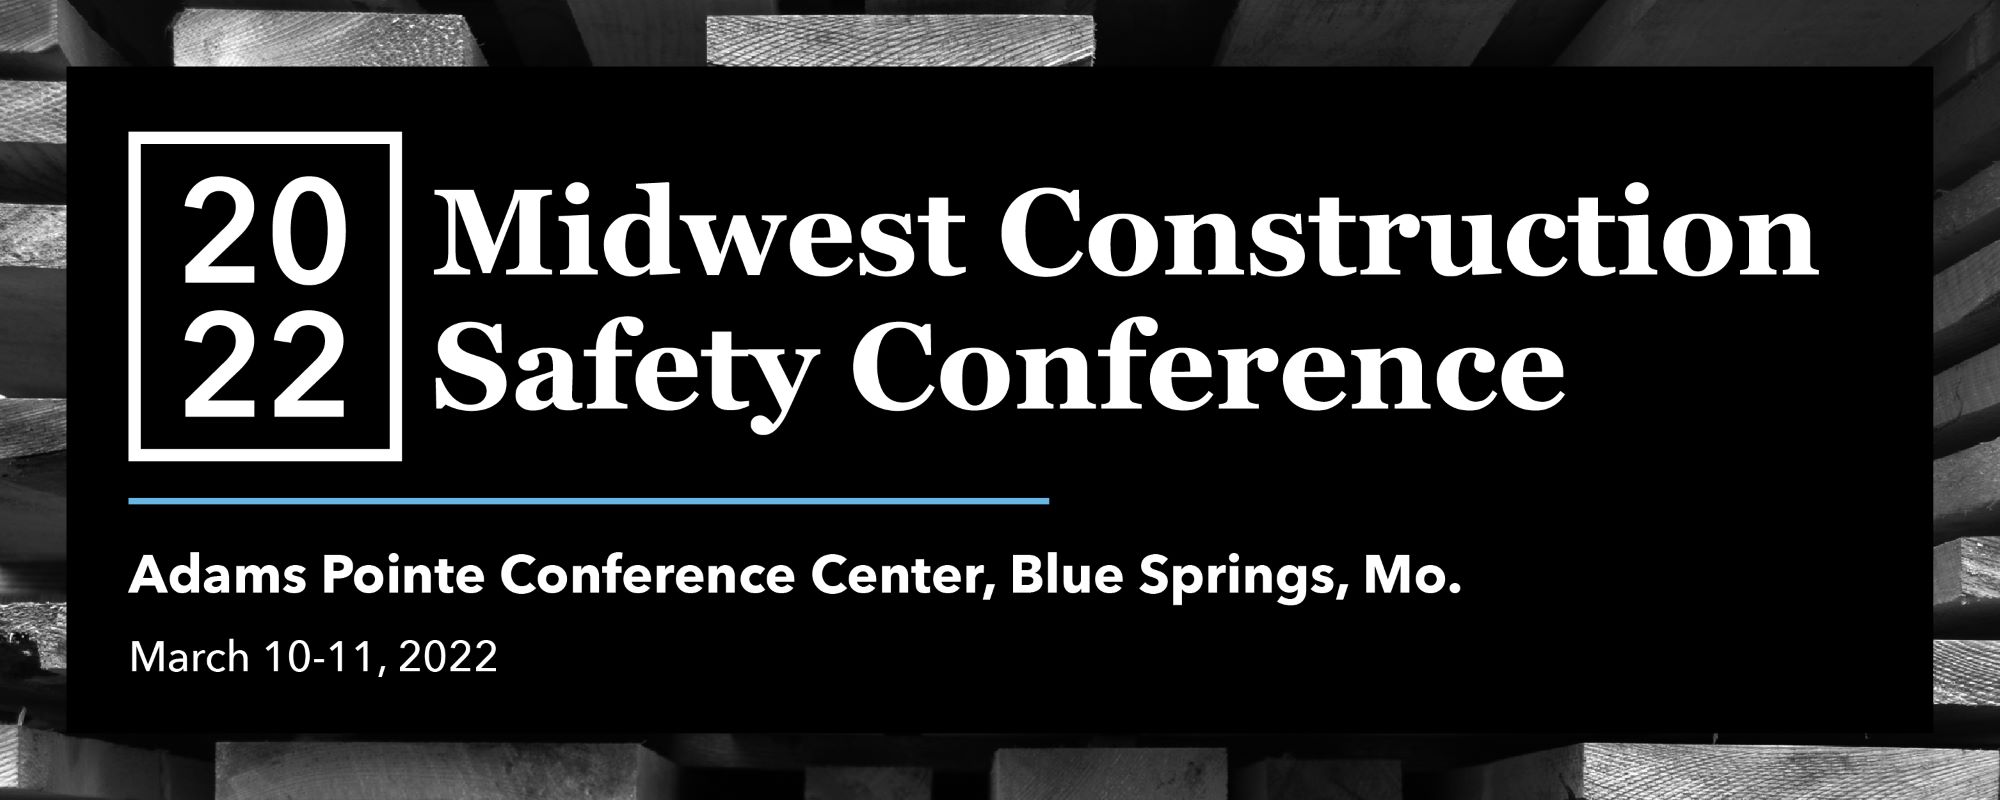 Midwest Construction Safety Conference 2022